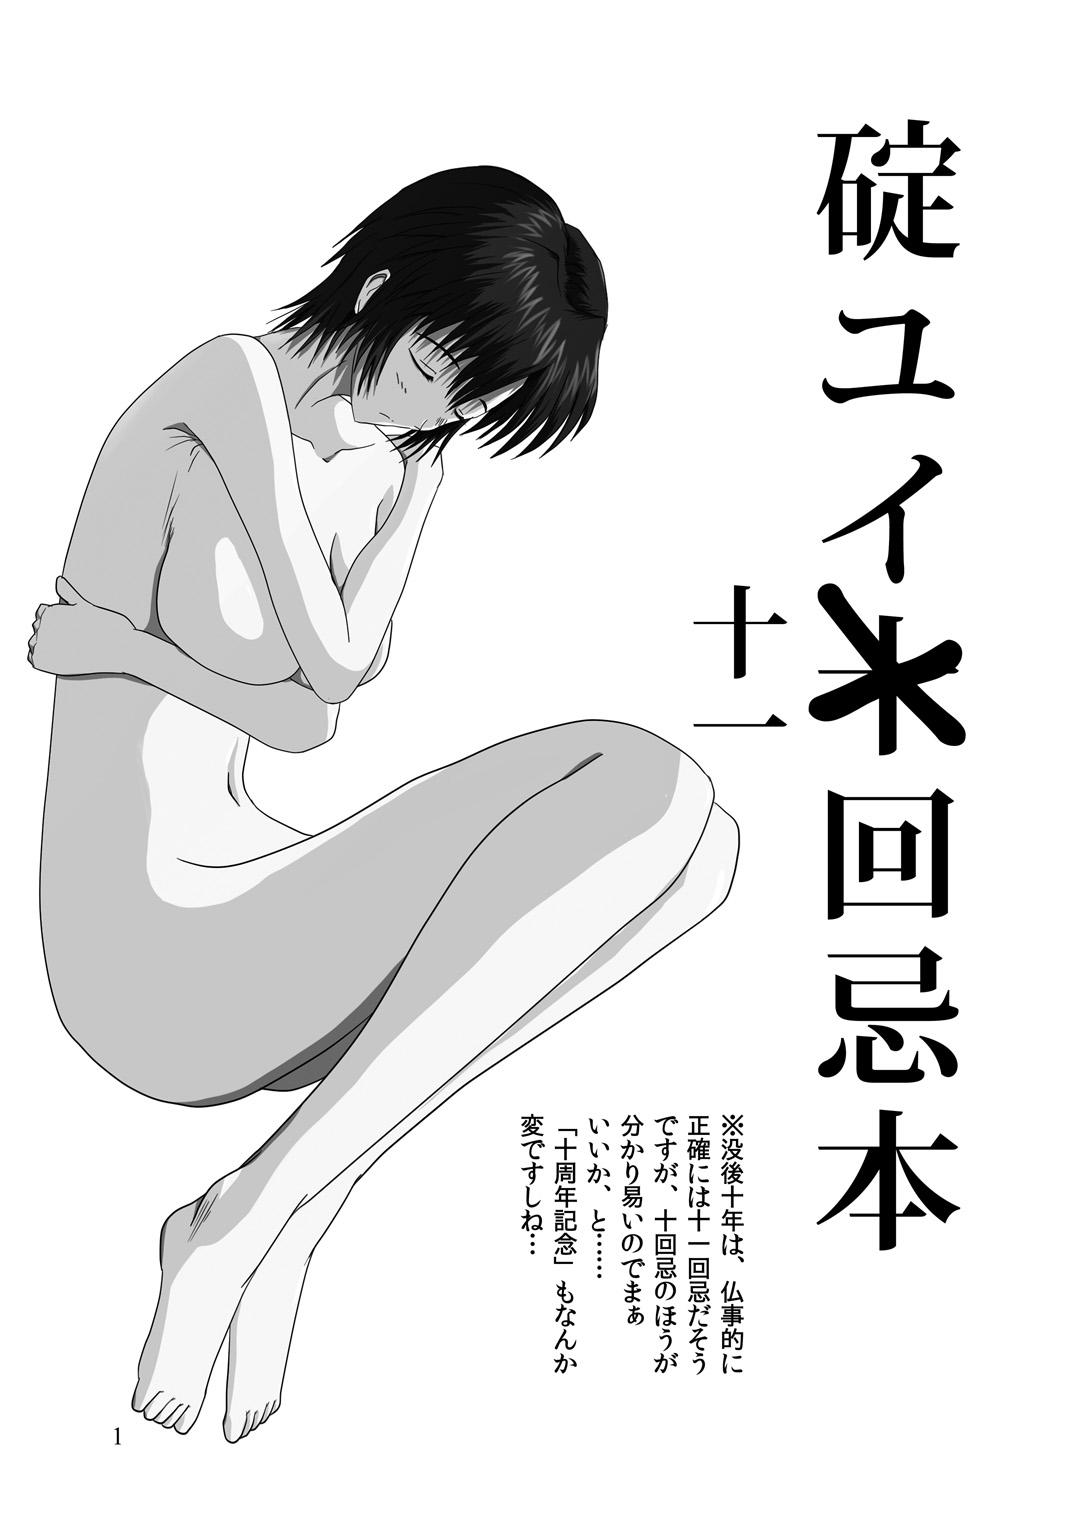 Livecams Yui Ikari 10th Anniversary Book - beyond the time - Neon genesis evangelion Transexual - Page 2